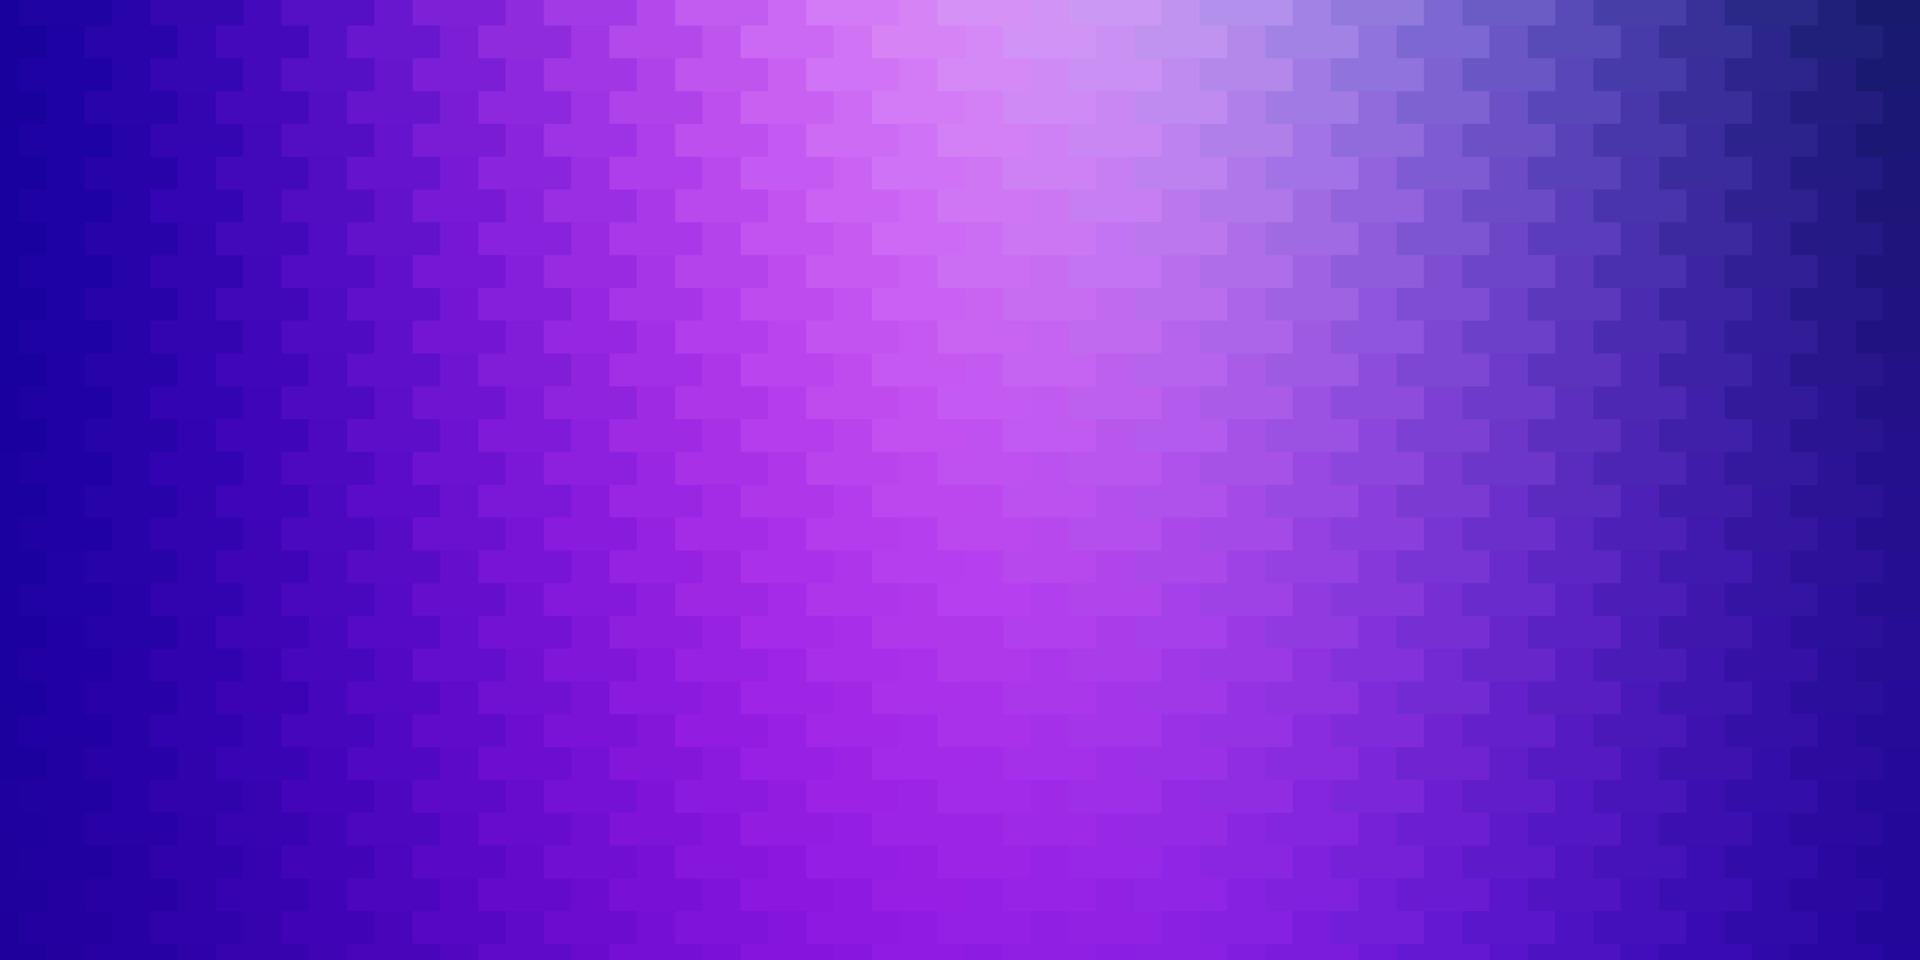 Light Purple, Pink vector backdrop with rectangles.